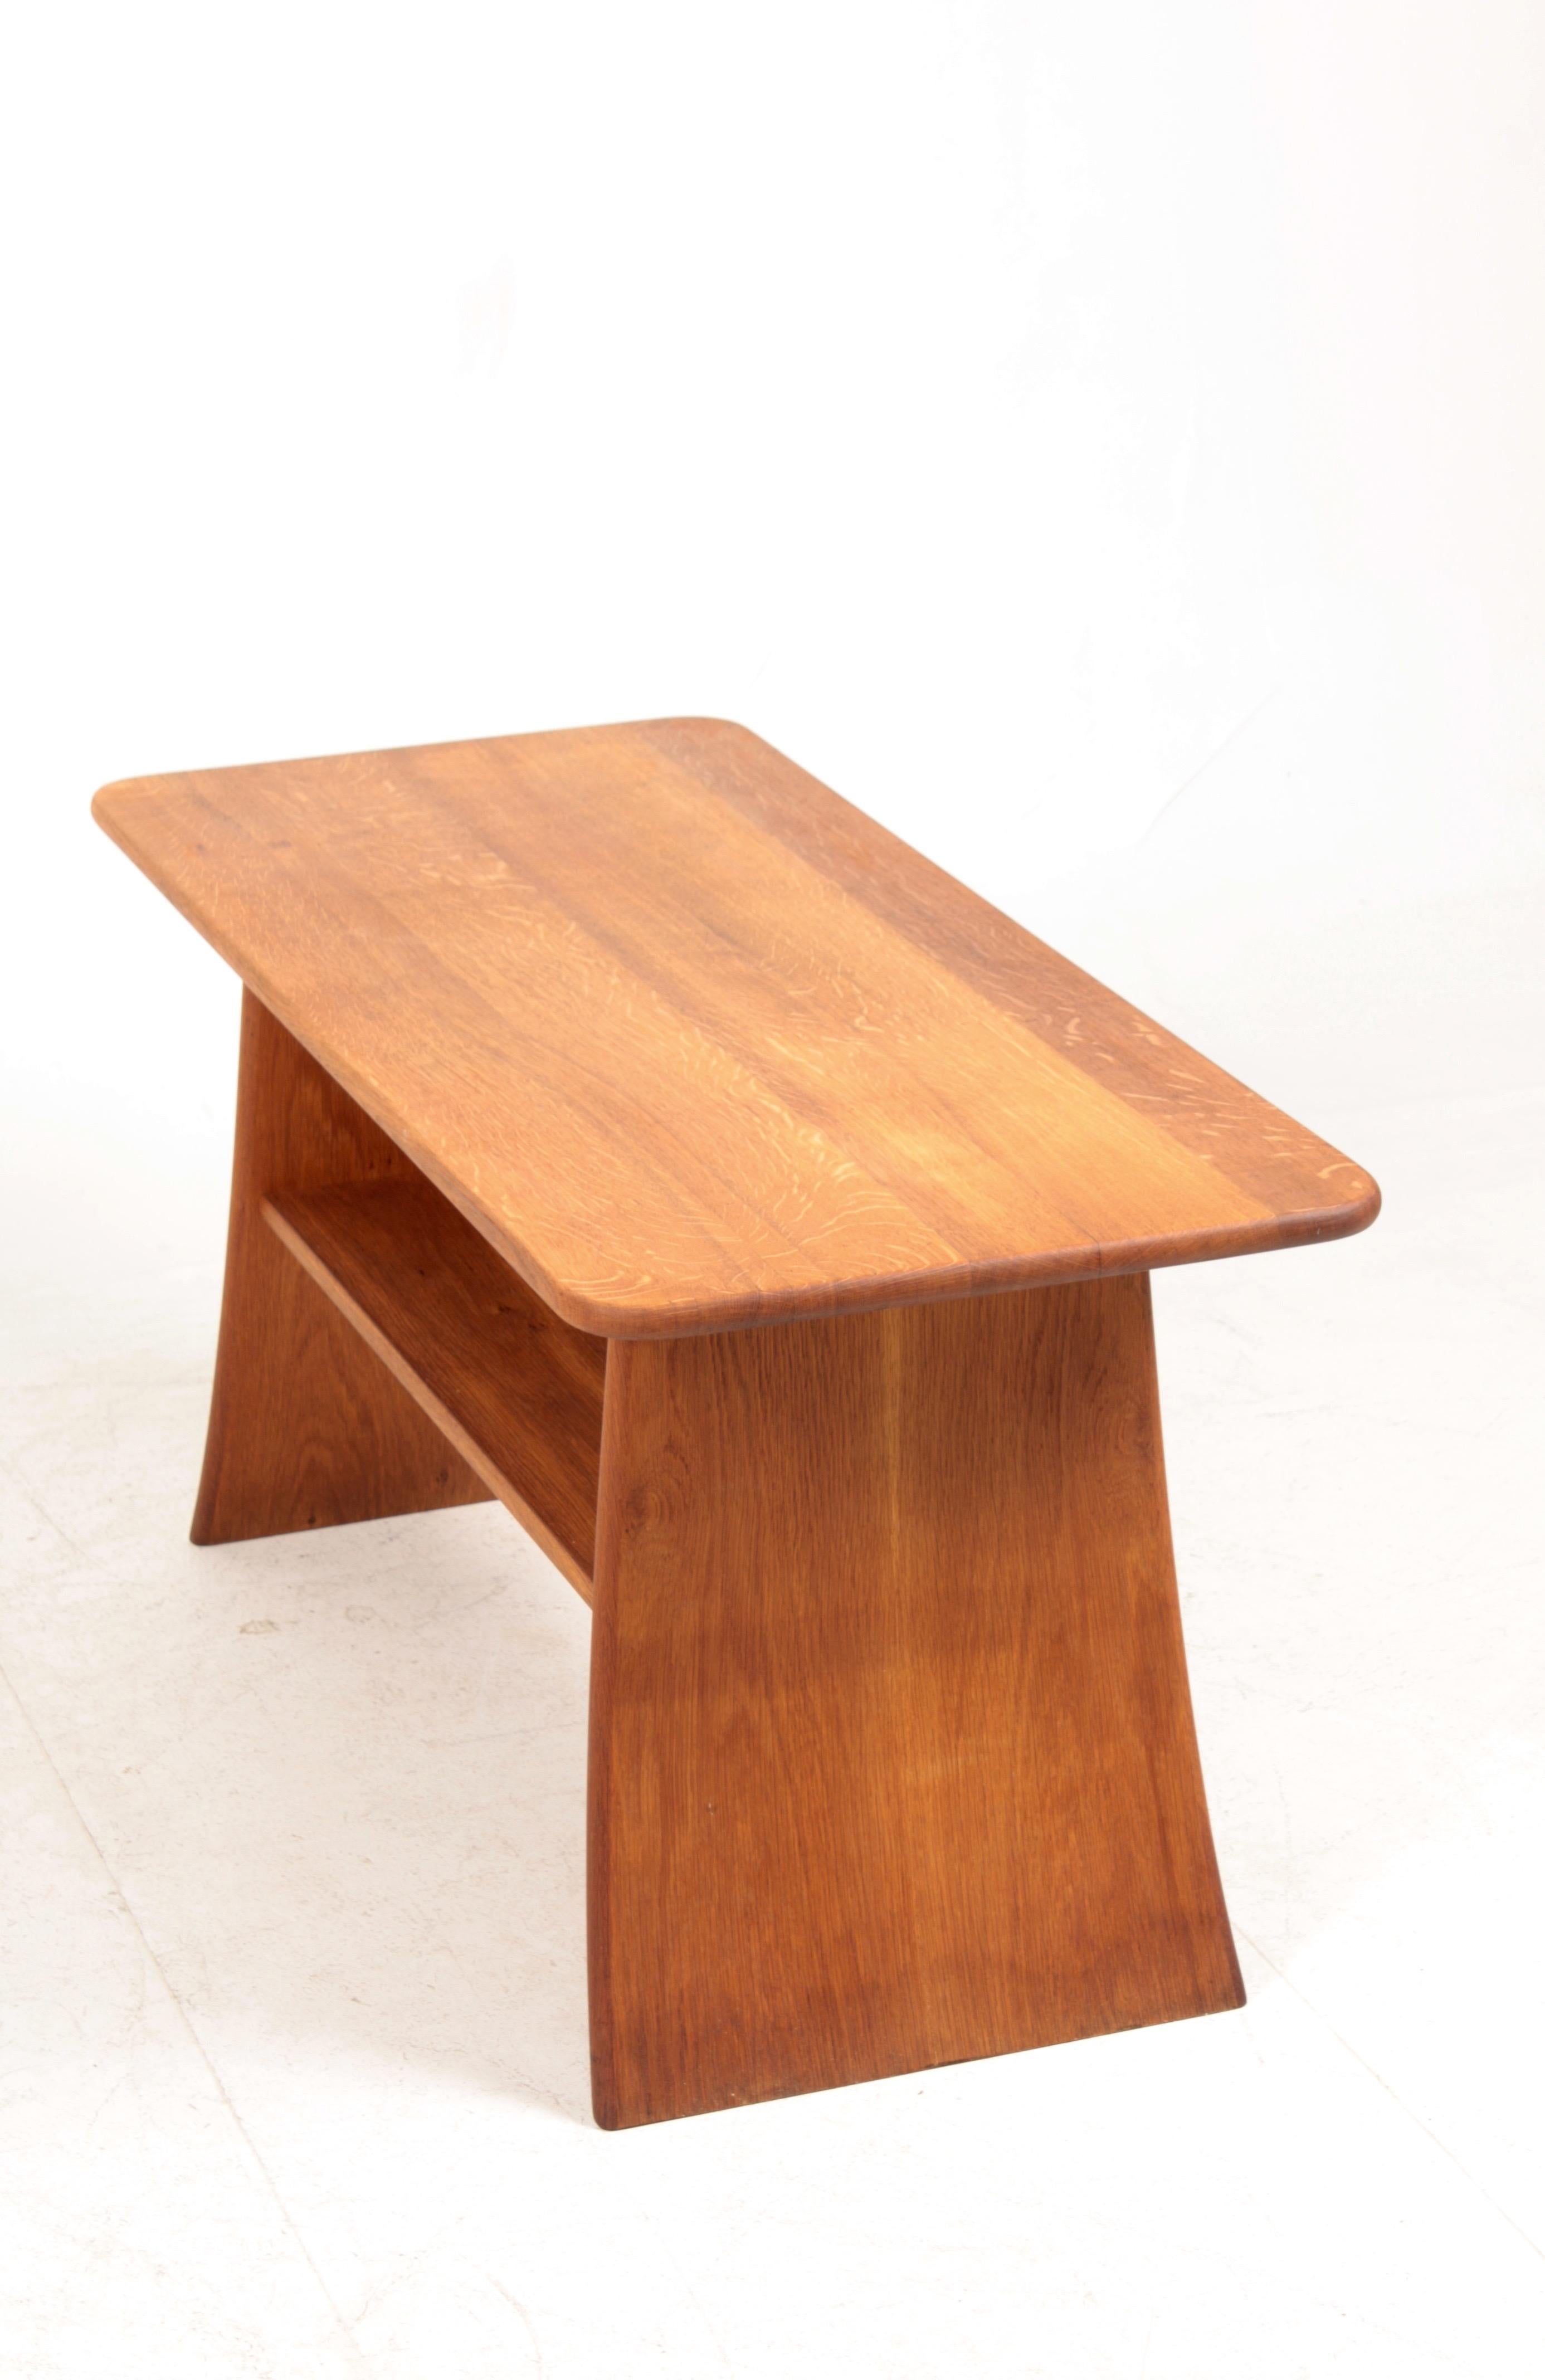 Mid-20th Century Midcentury Low Table in Solid Oak, Danish Cabinetmaker, 1950s For Sale